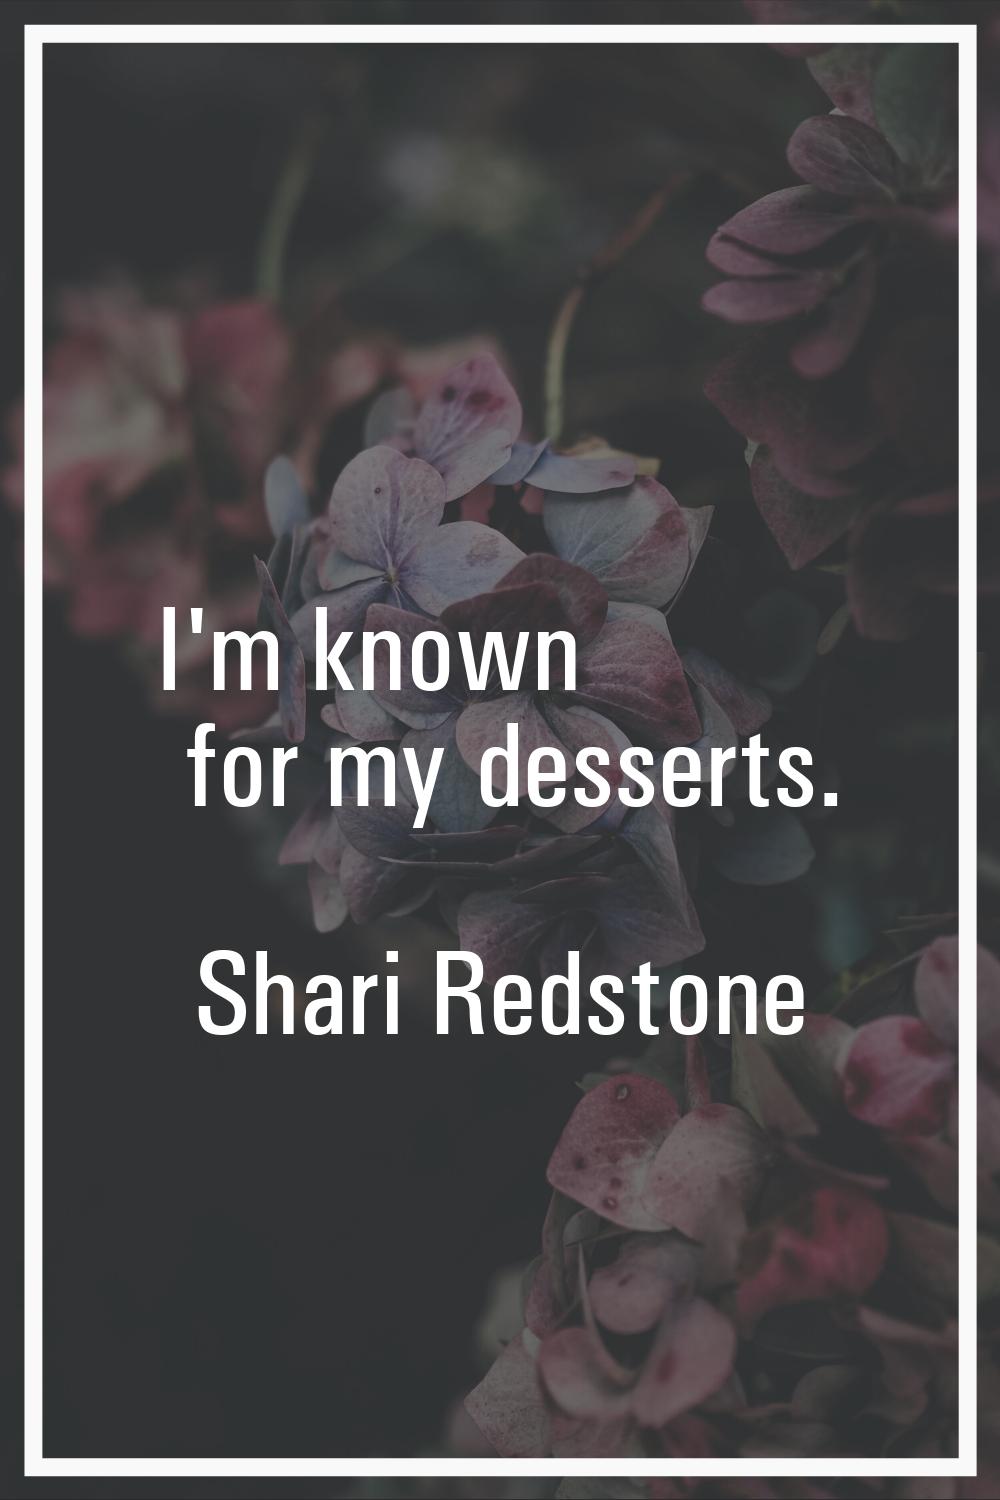 I'm known for my desserts.